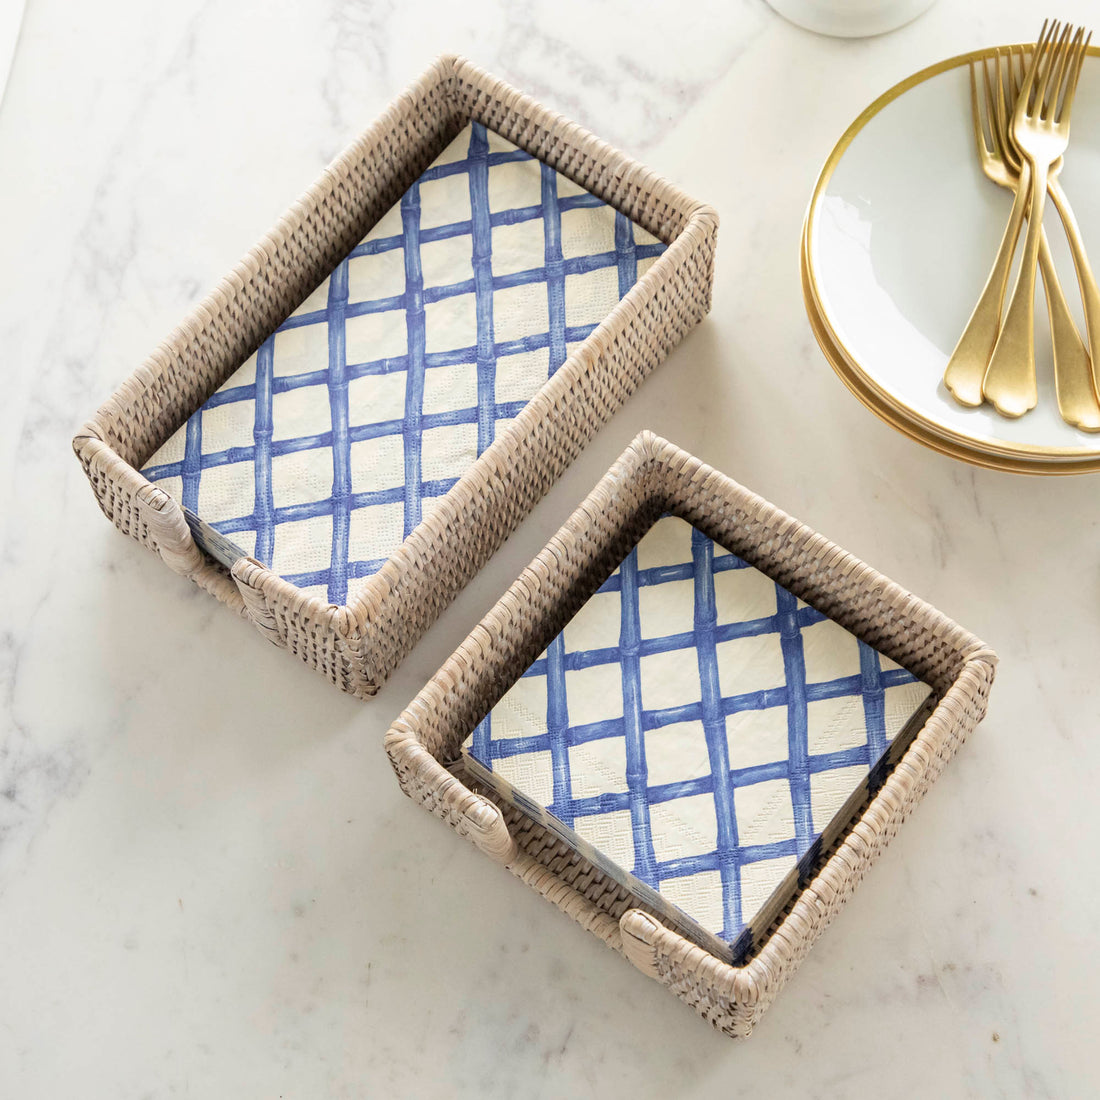 A two Rattan Napkin Holders from Napa Home &amp; Garden on a marble surface.